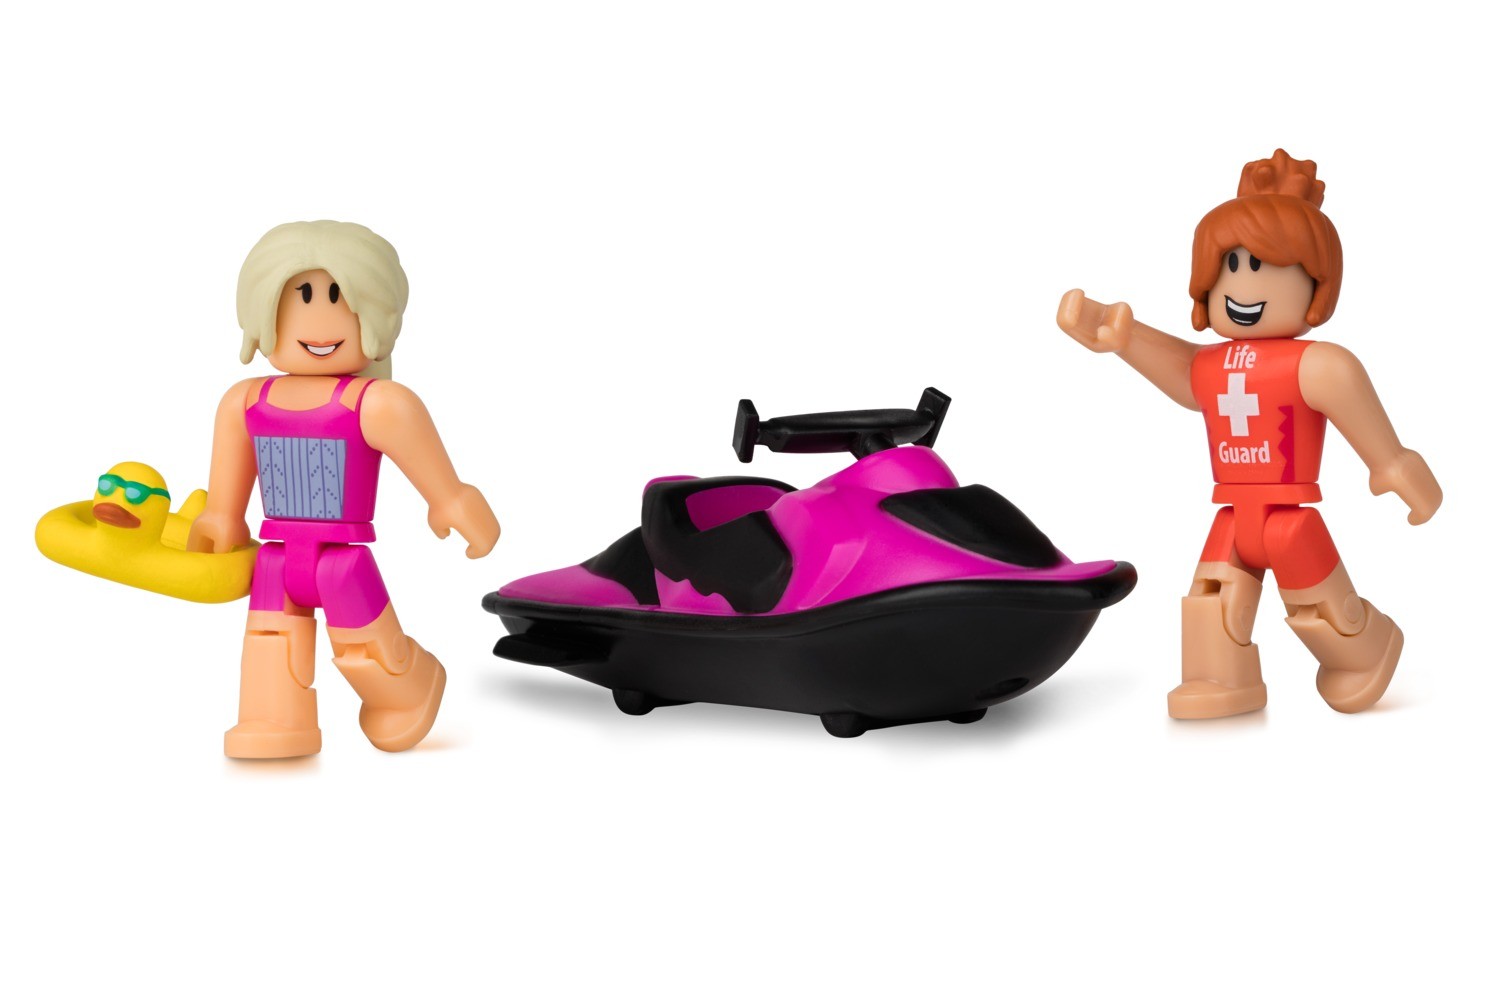 The Plaza Jet Skiers Roblox Action Figure - 